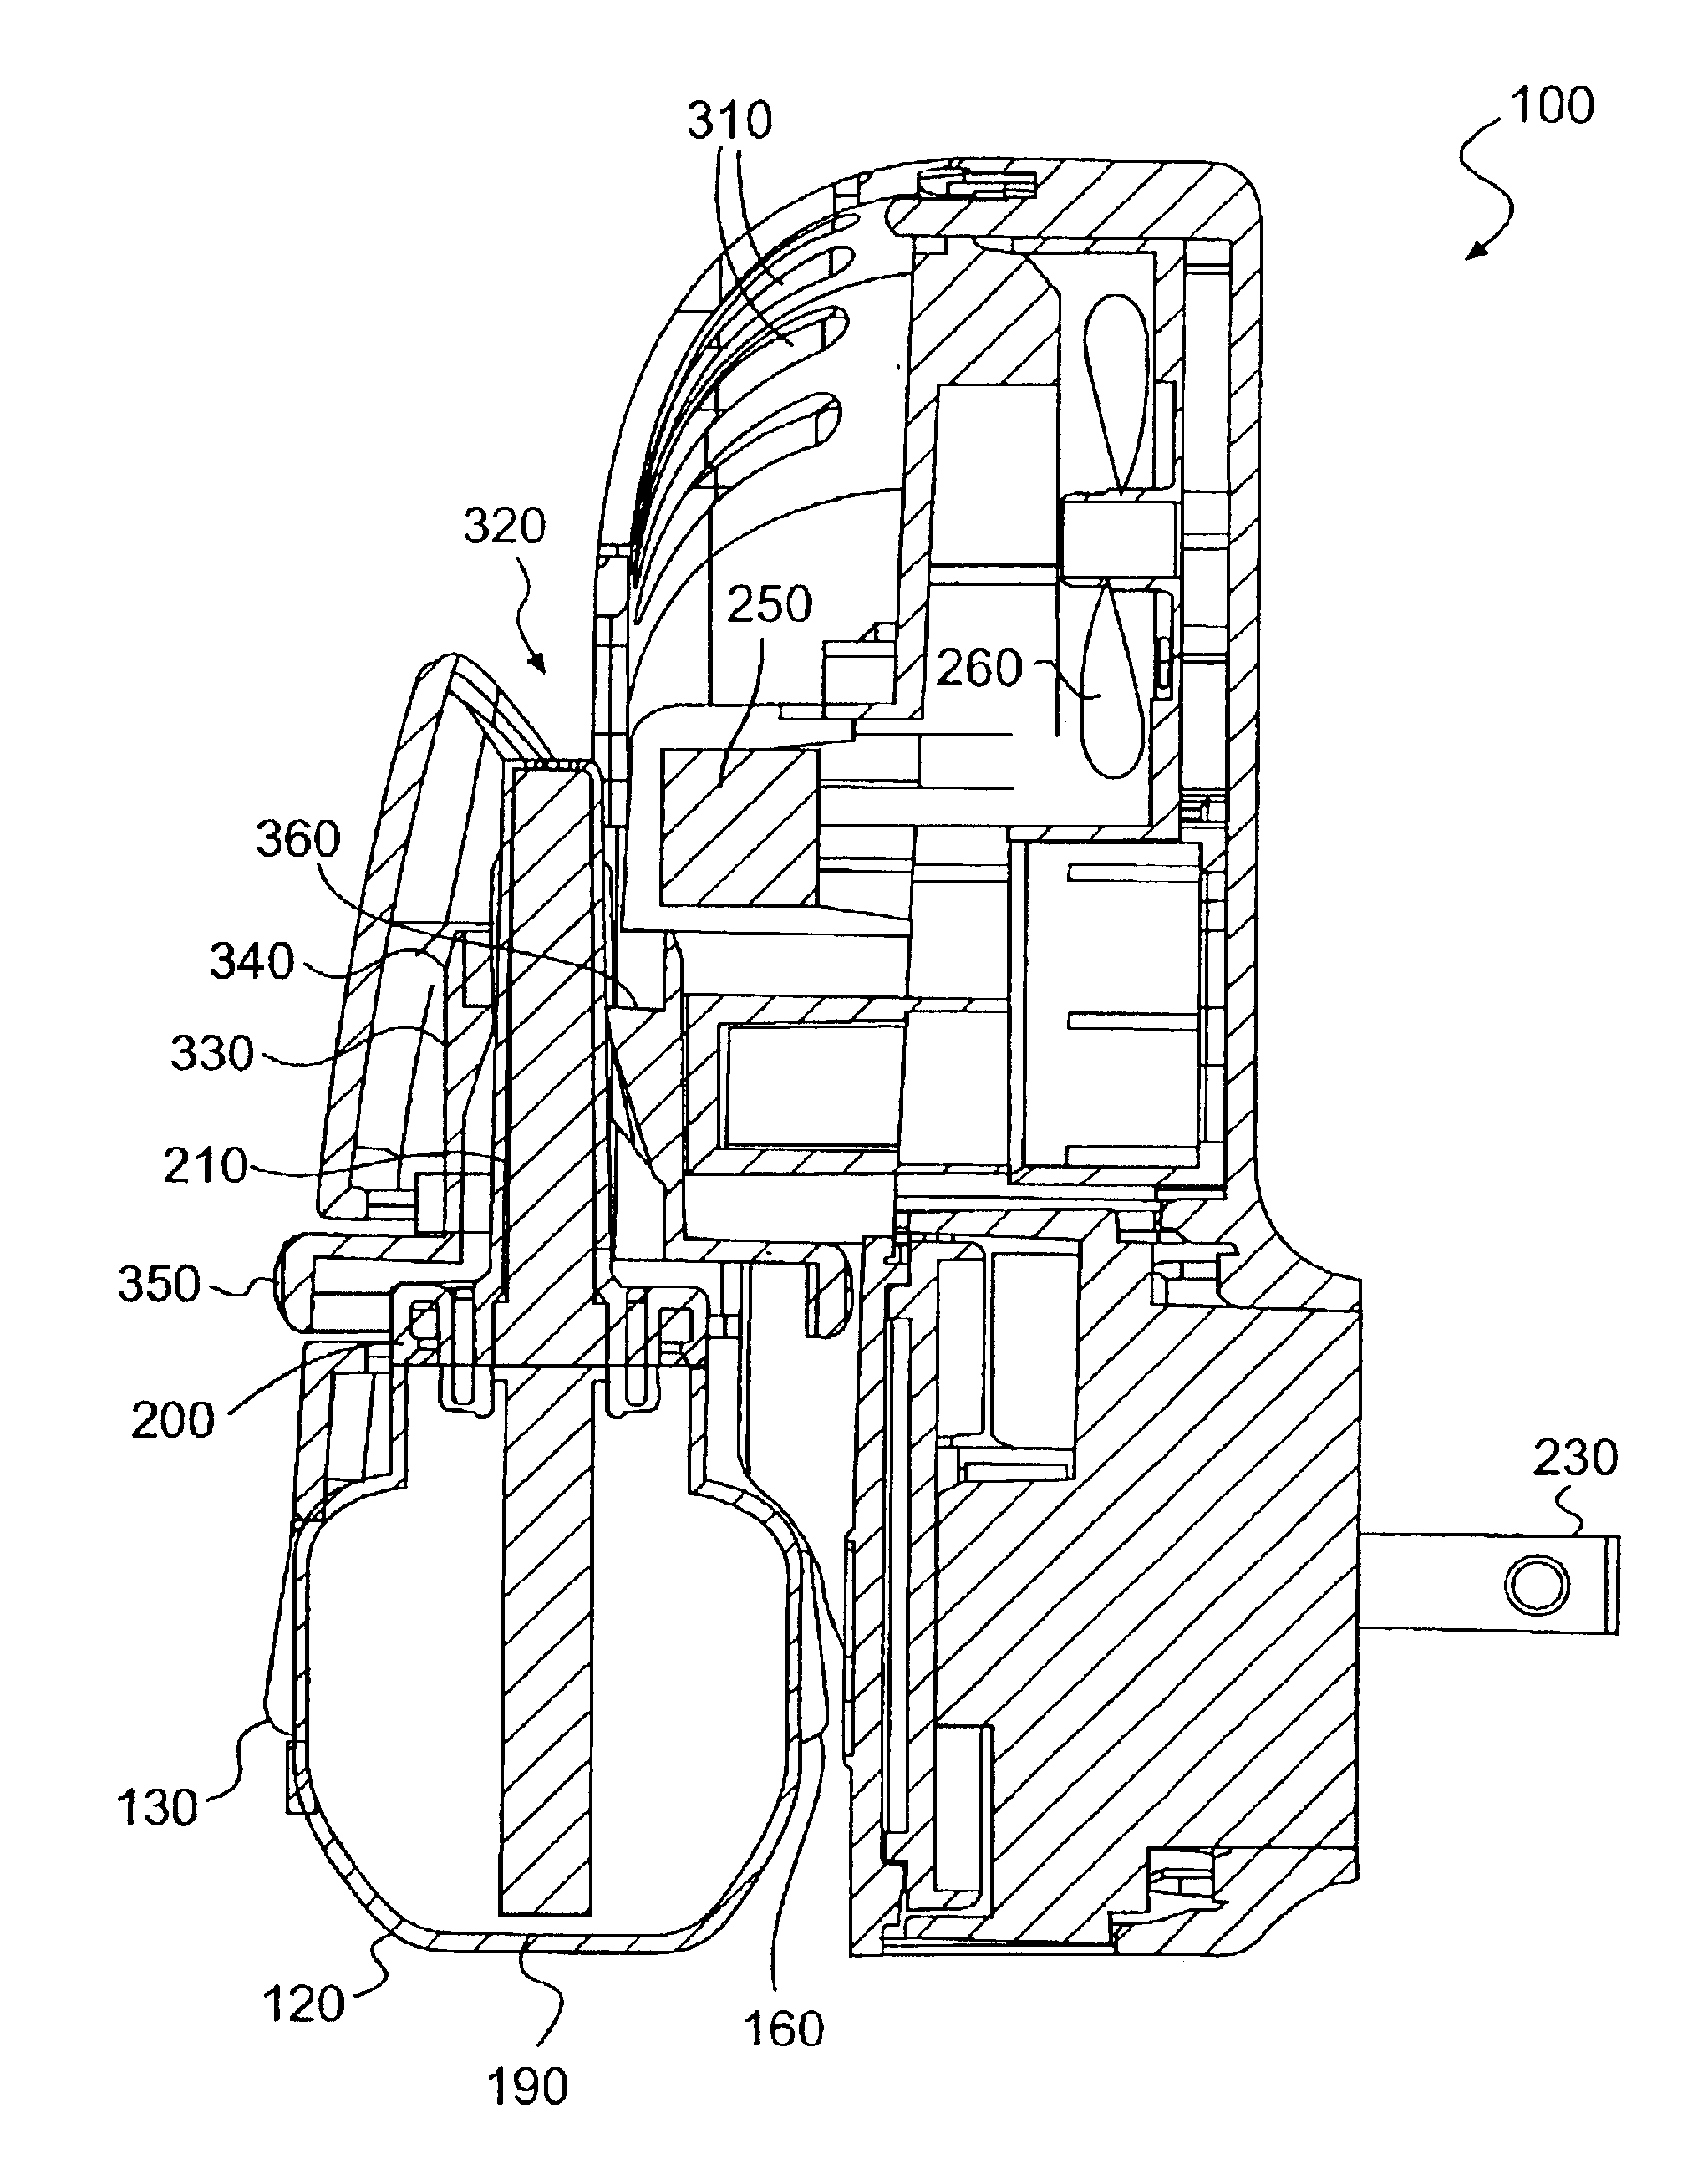 Electrical evaporator with adjustable evaporation intensity